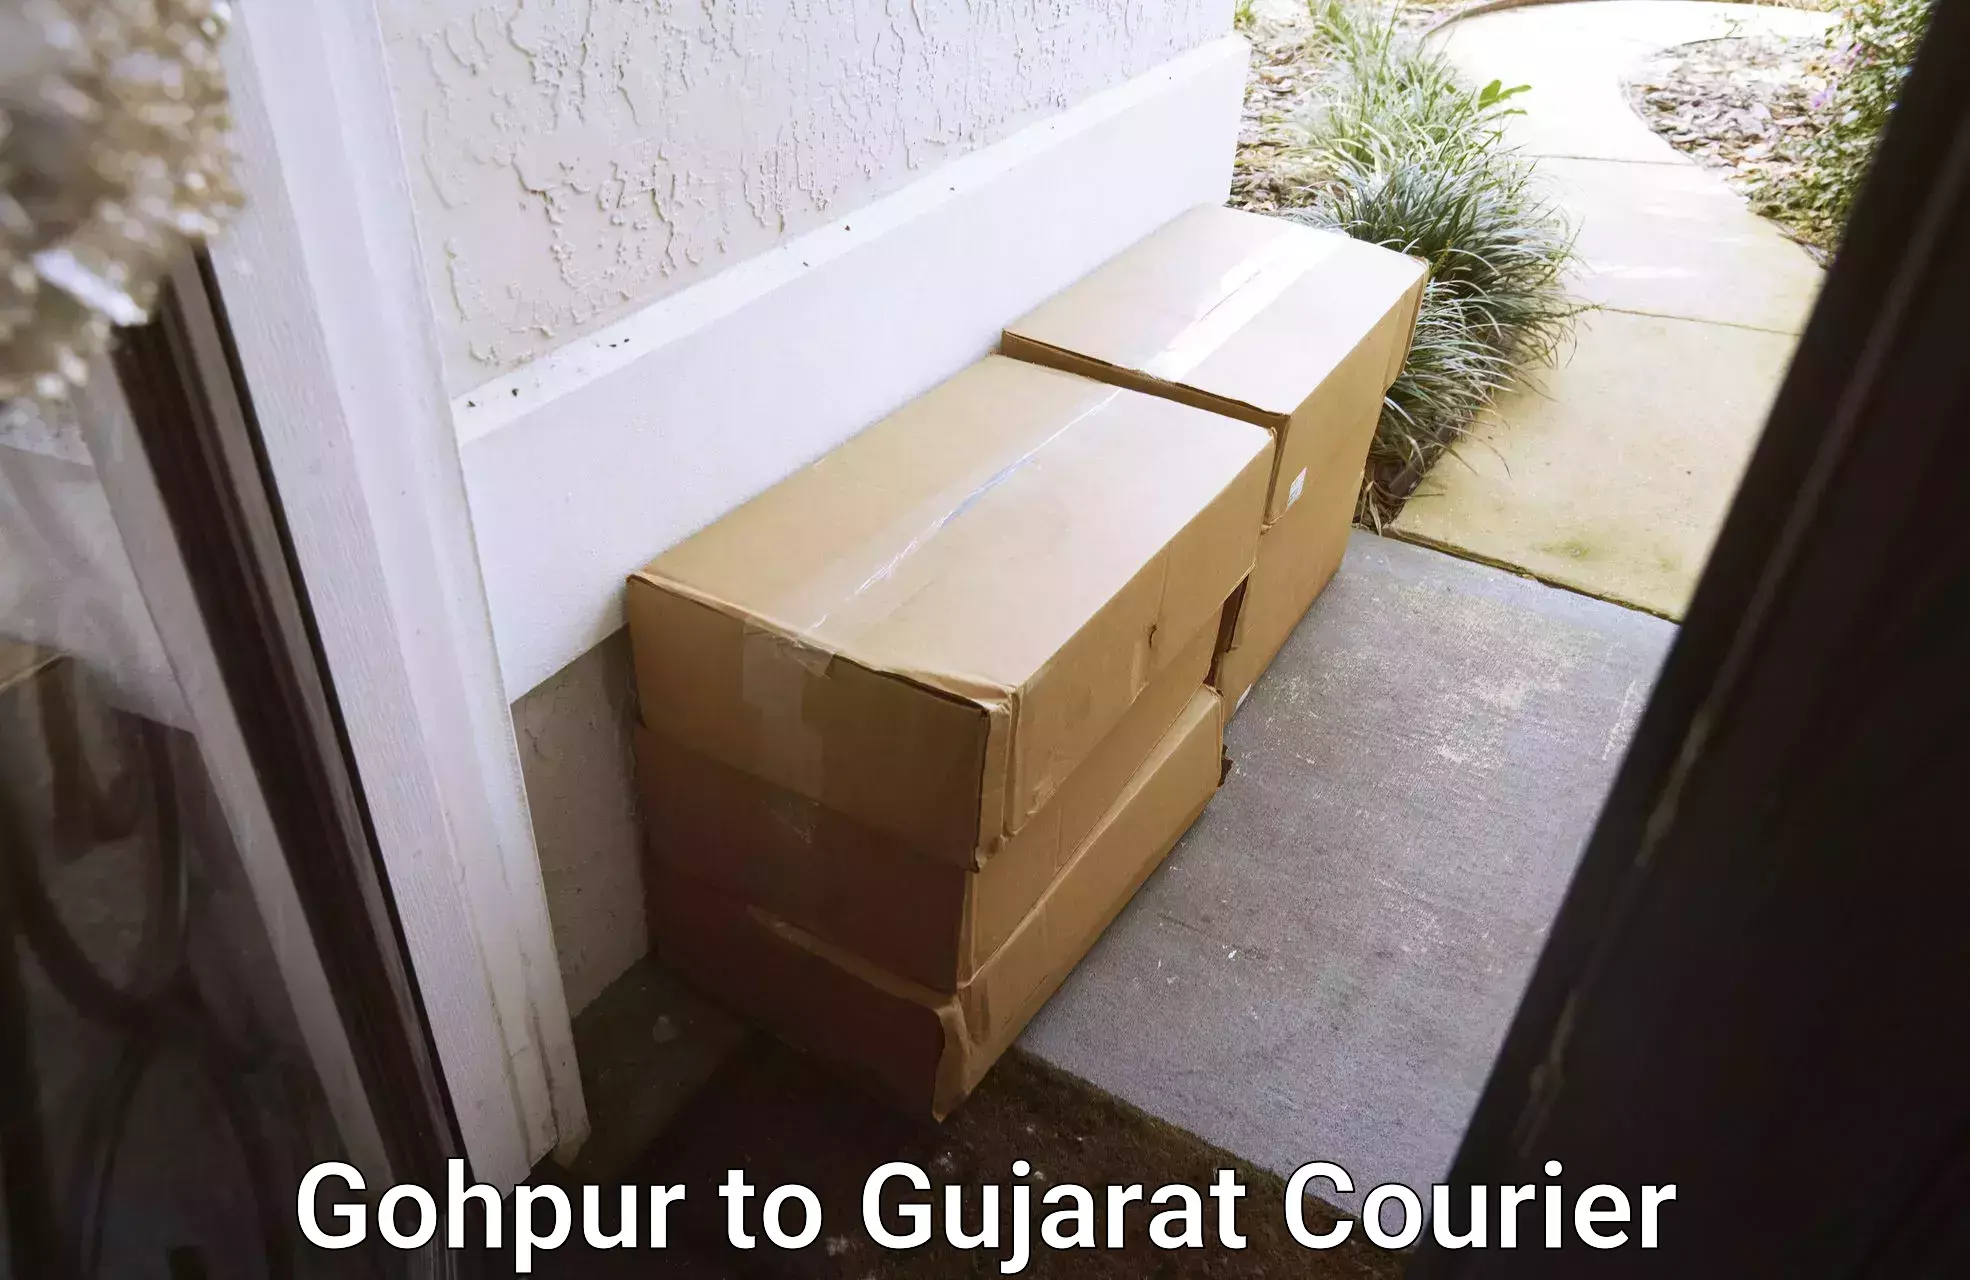 Residential courier service in Gohpur to Narmada Gujarat